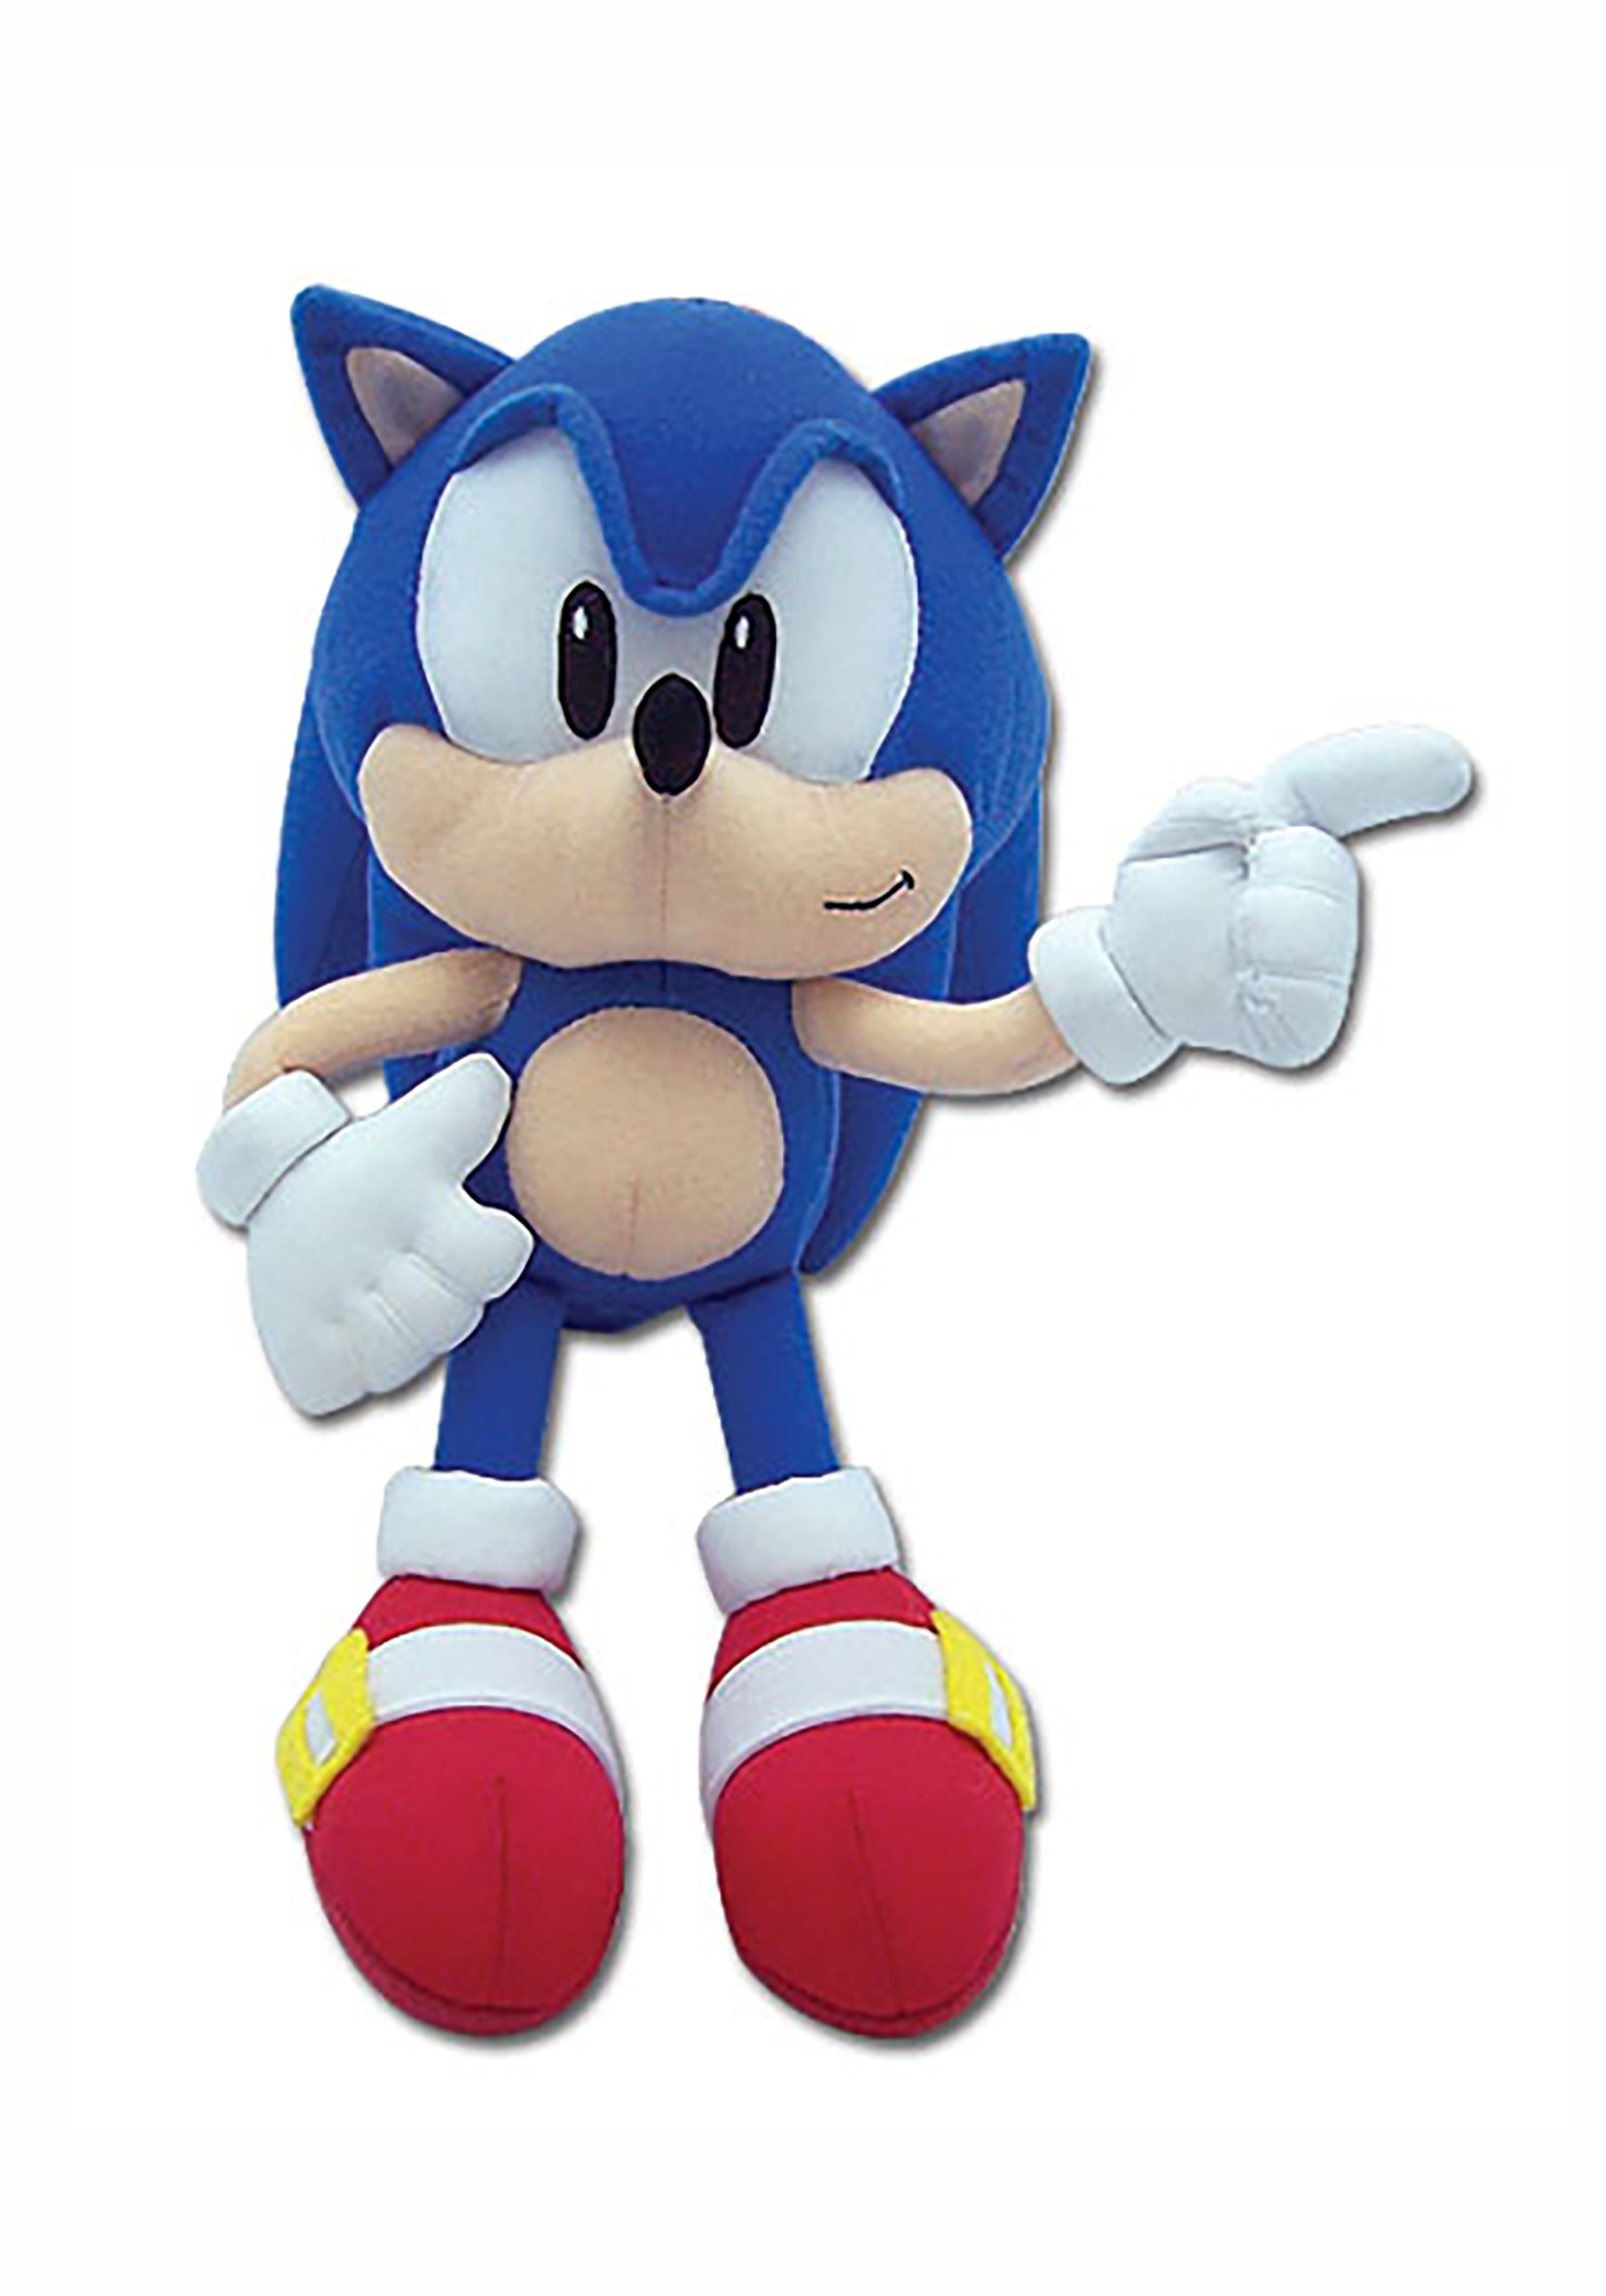 classic sonic characters toys box